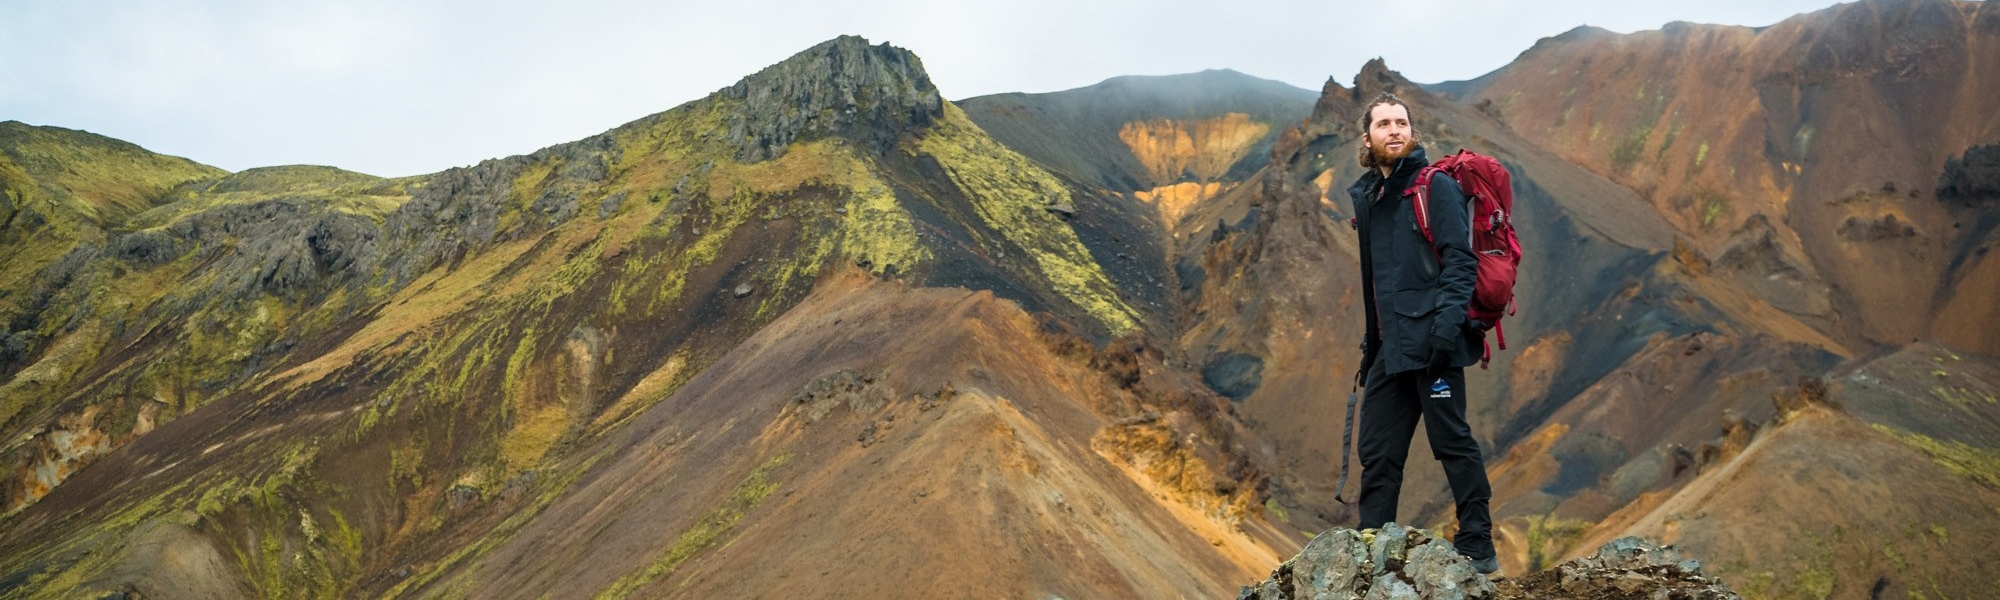 How to Prepare for Hiking and Trekking in Iceland